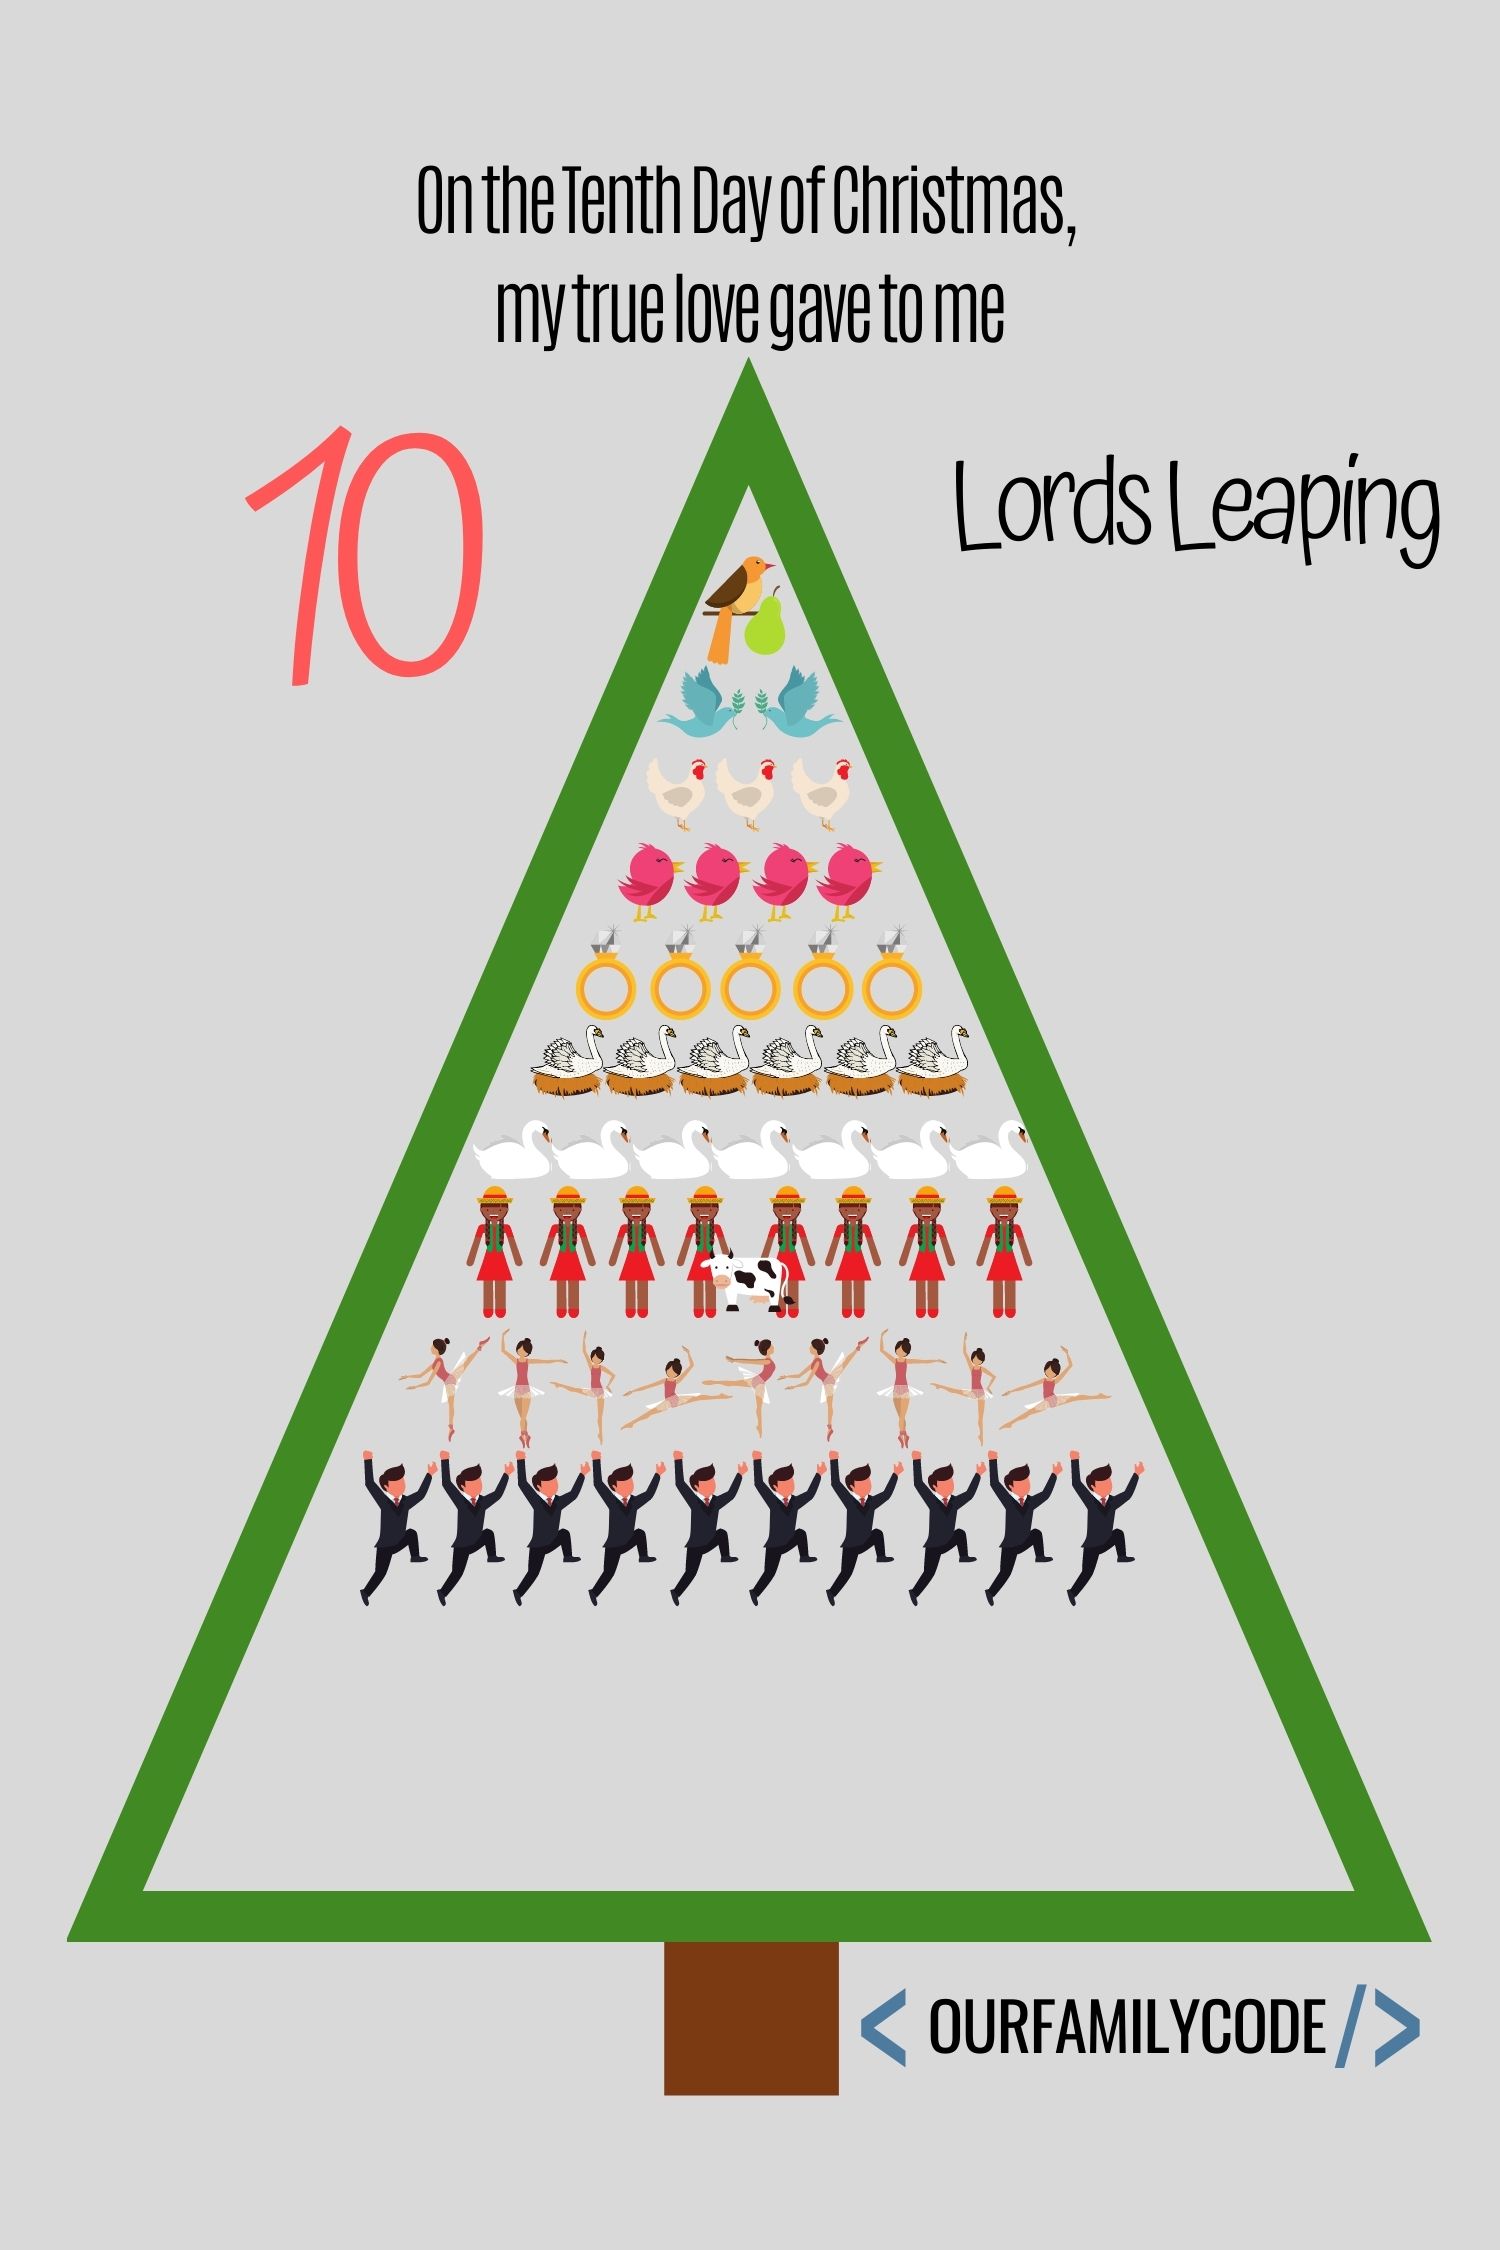 12 days of christmas ten lords leaping